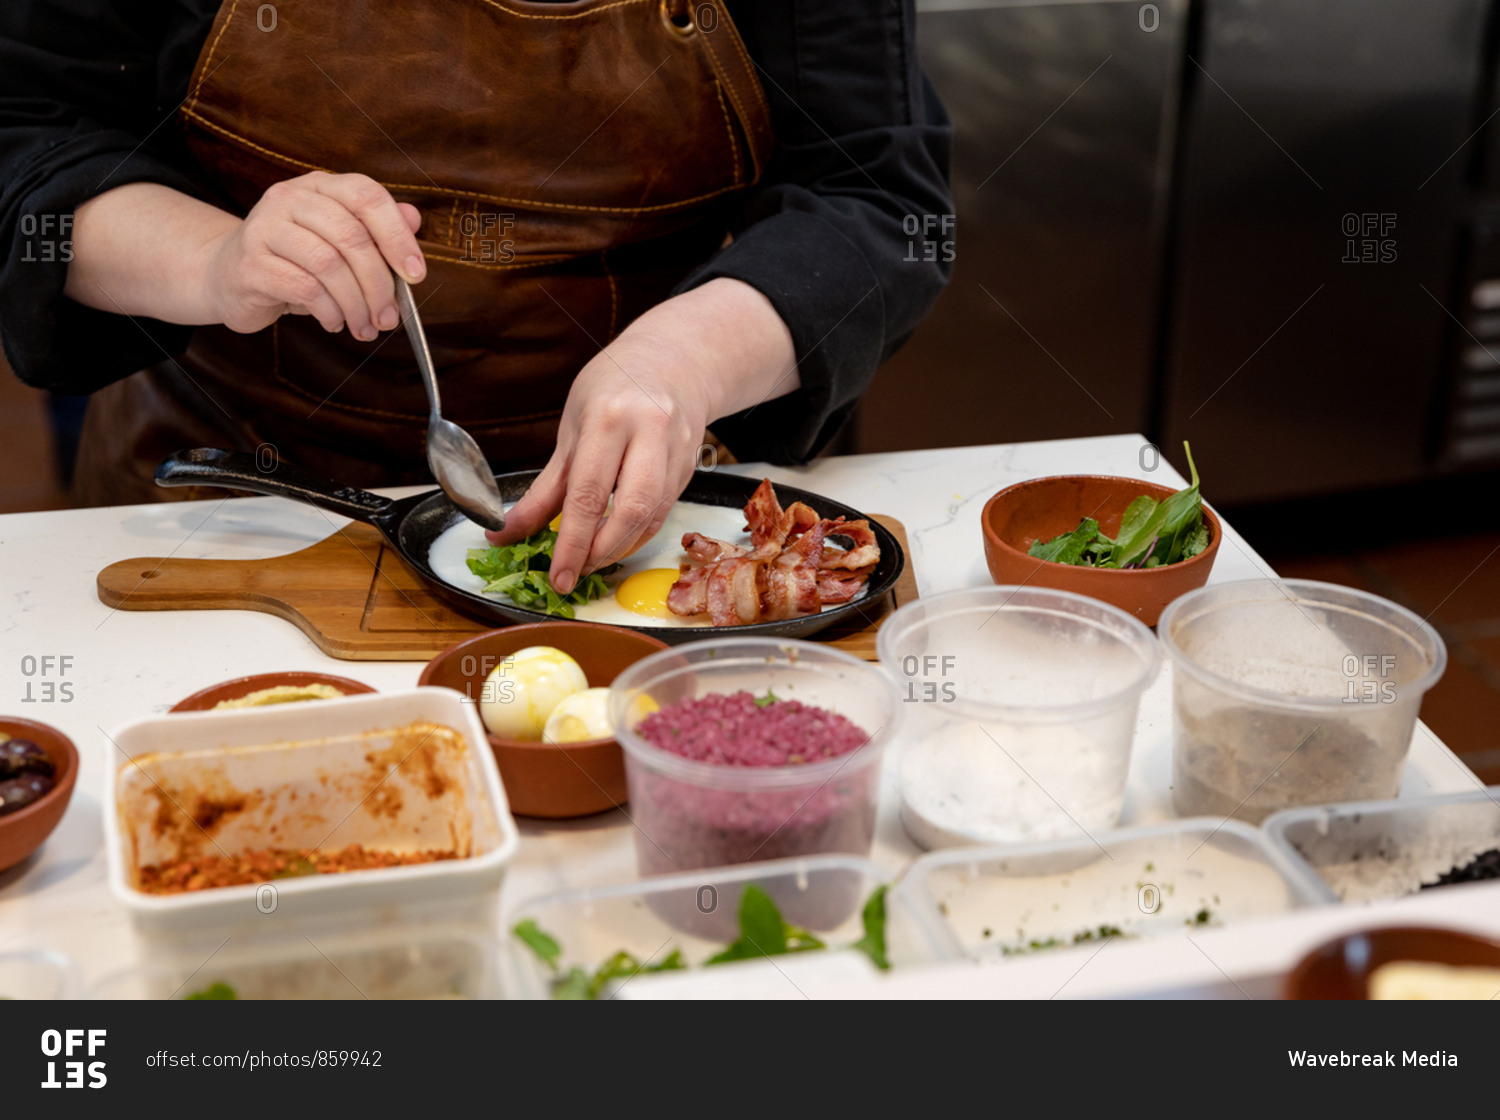 Front view mid section of a Caucasian female chef arranging food to be served in a pan in a restaurant kitchen